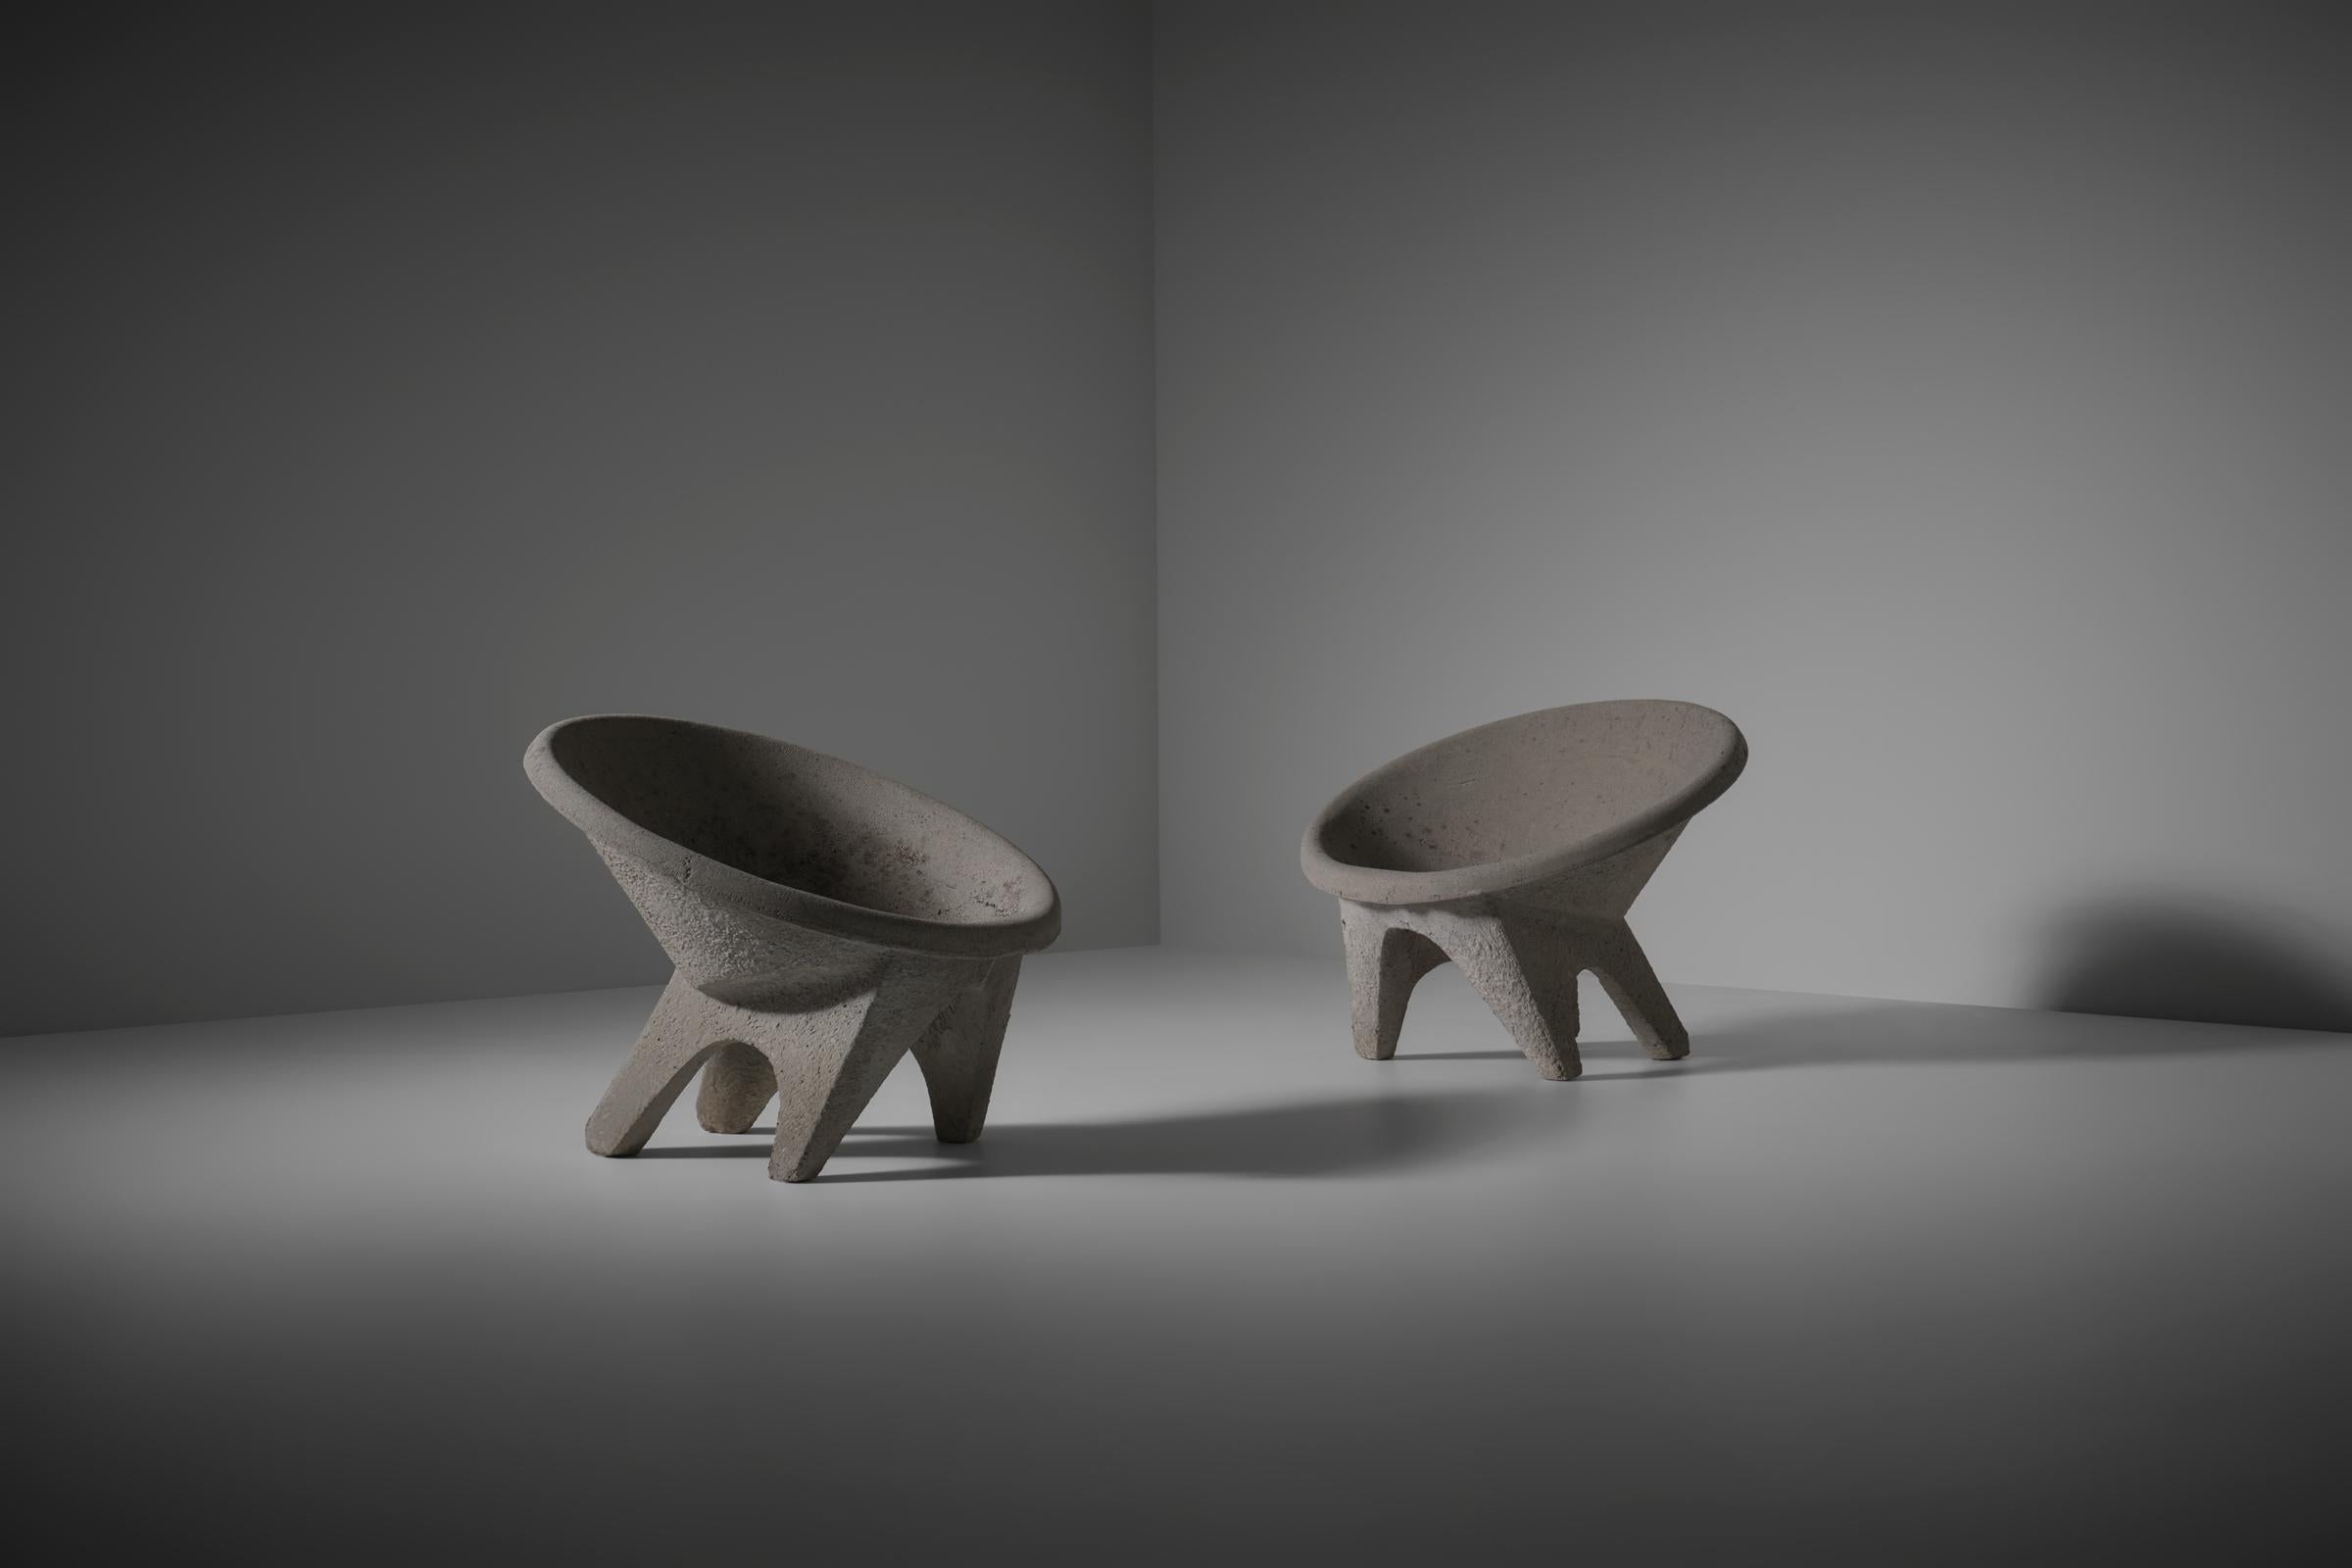 Sculptural concrete ‘sphere’ chairs, Italy - 1960’s. The chairs where produced by a company from Modena- Italy who where specialized in architectonic concrete outdoor objects and furniture. The chairs are made of solid weaponed concrete and have a